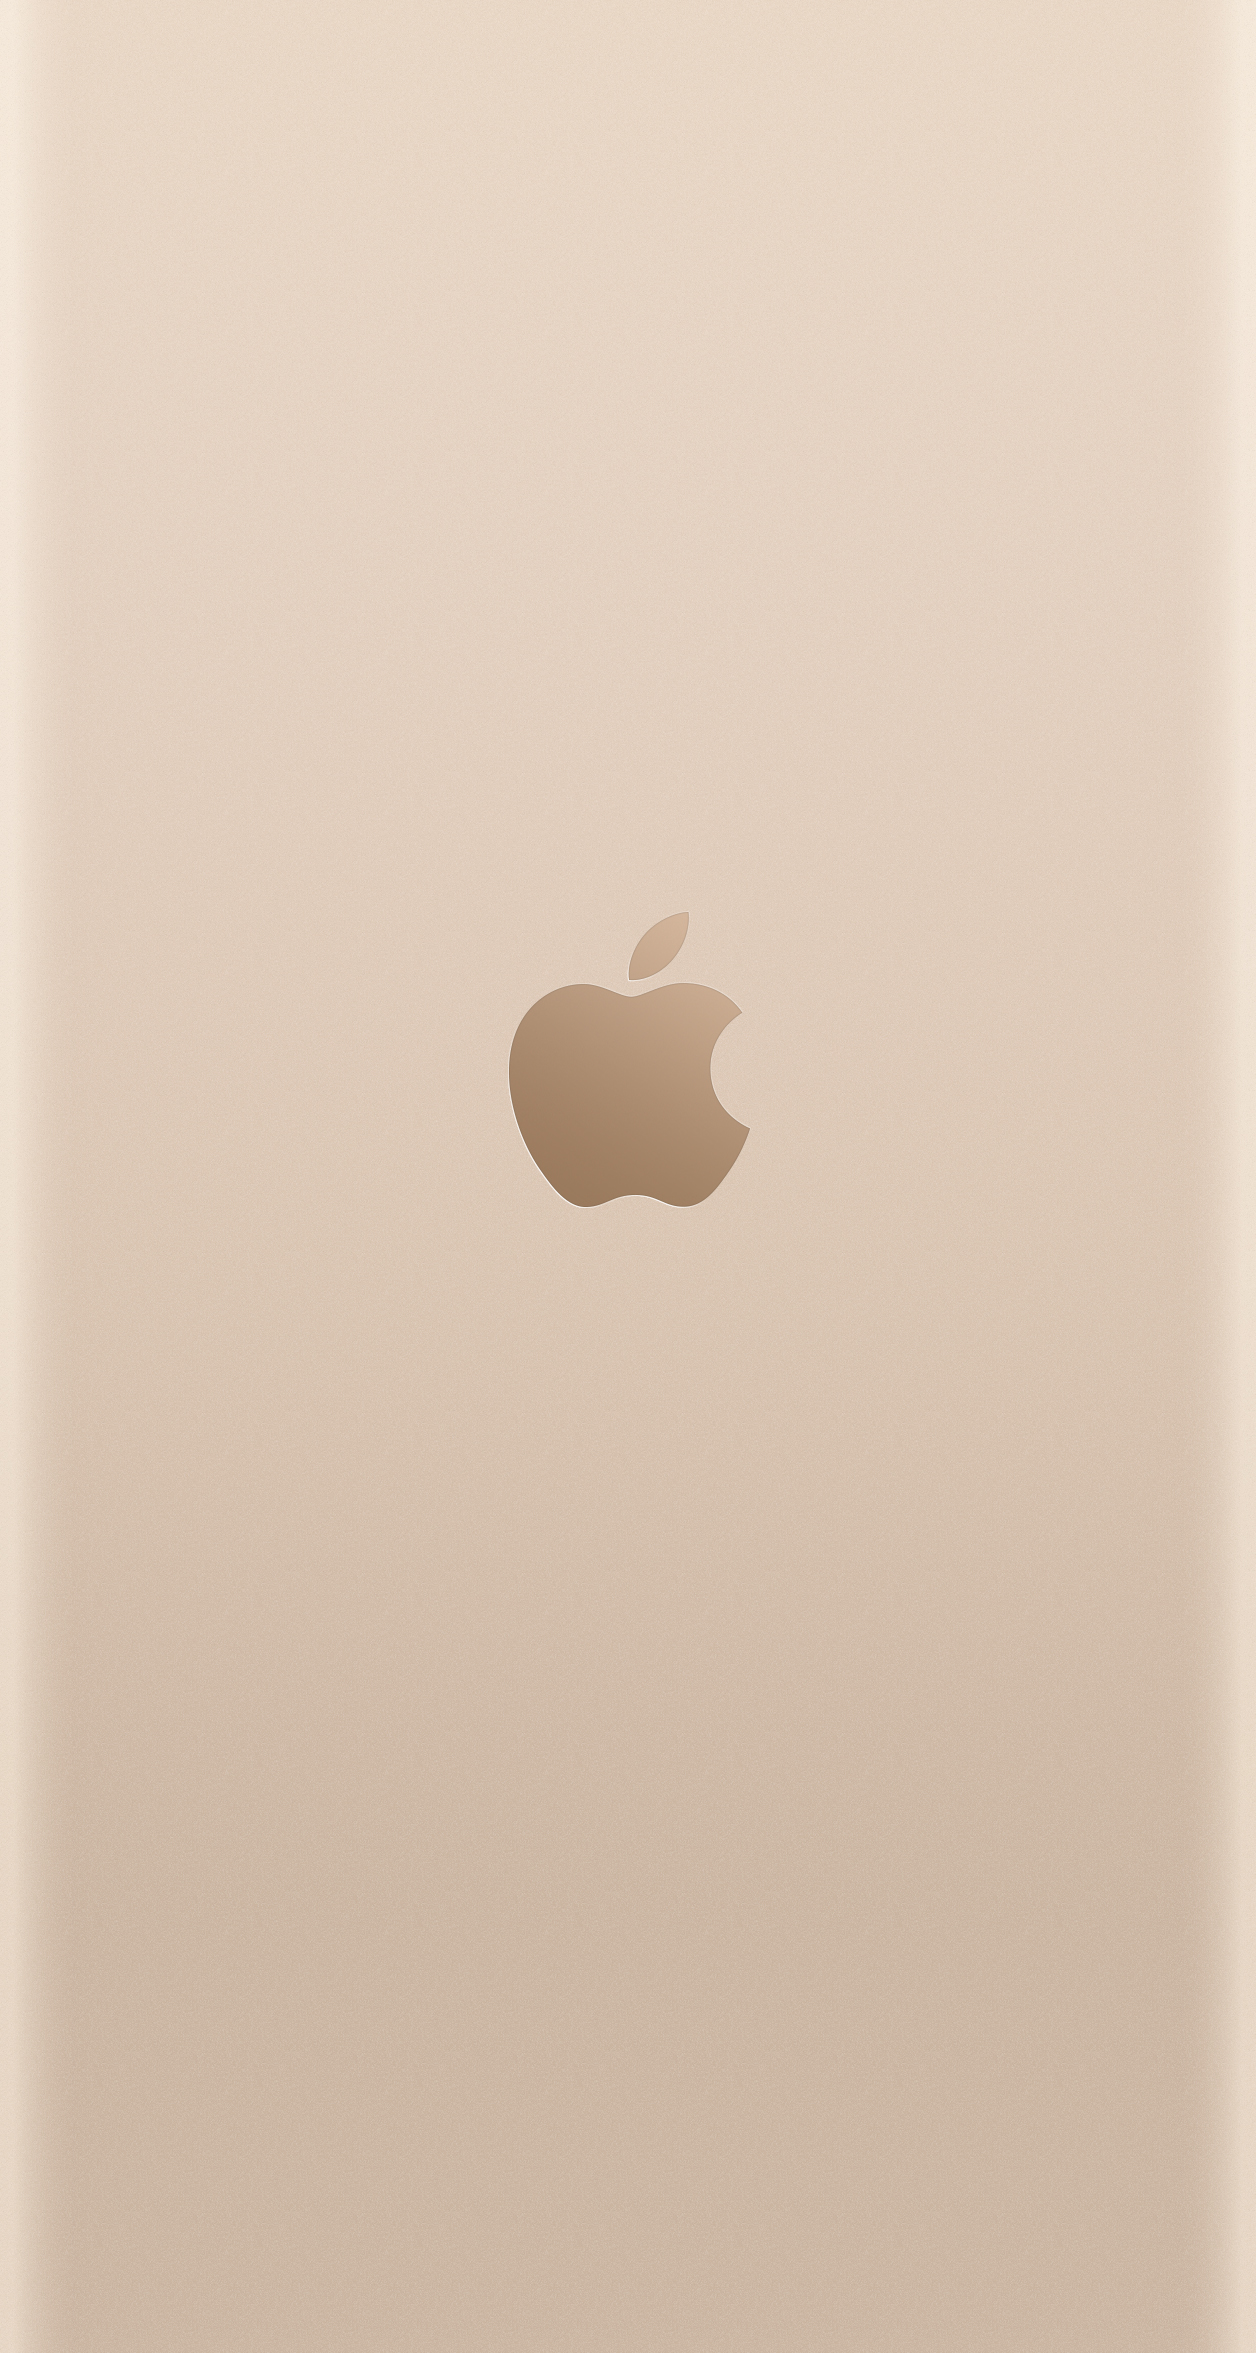 Apple Logo wallpaper for iPhone 6 and iPhone 6 Plus